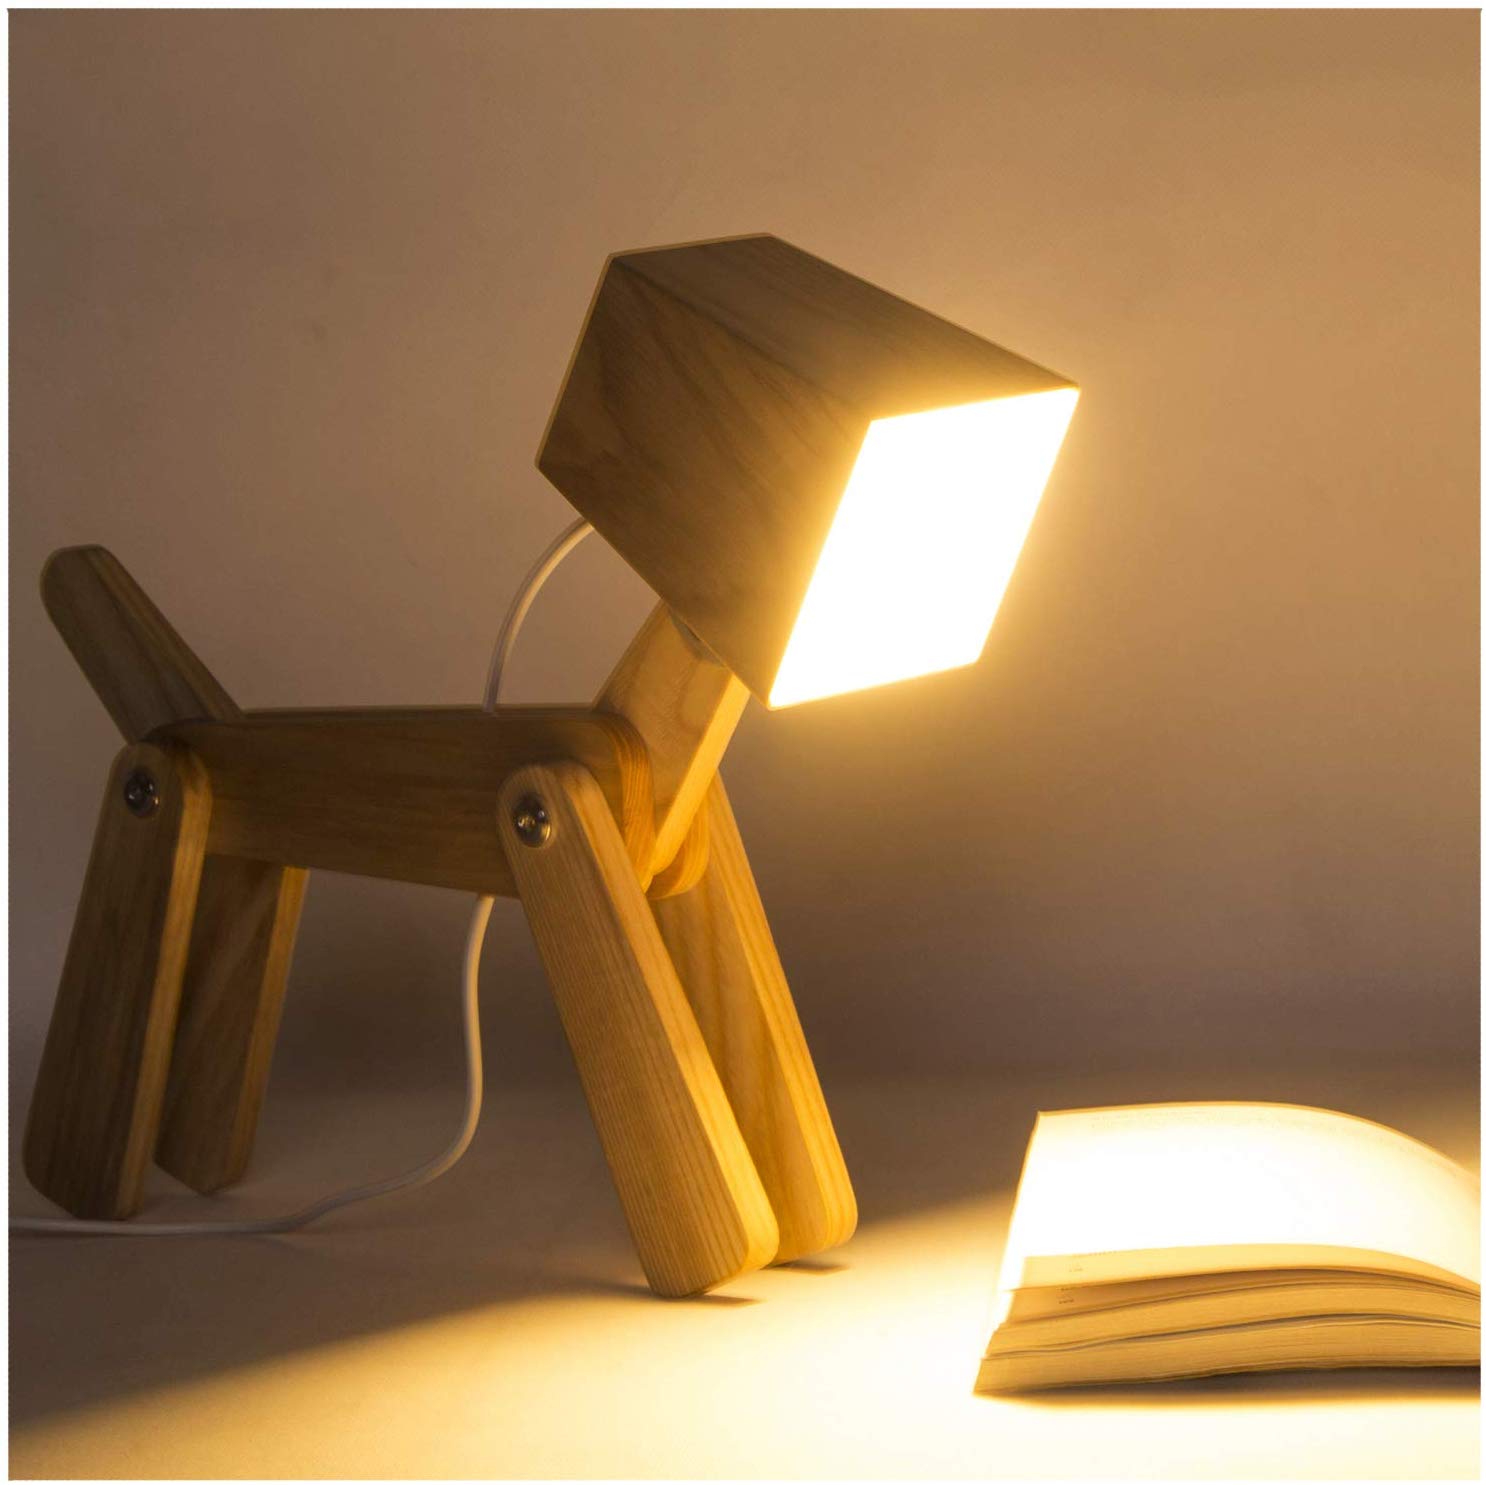 Cute Wooden Dog Design Adjustable Dimmable Bedside Table Lamp